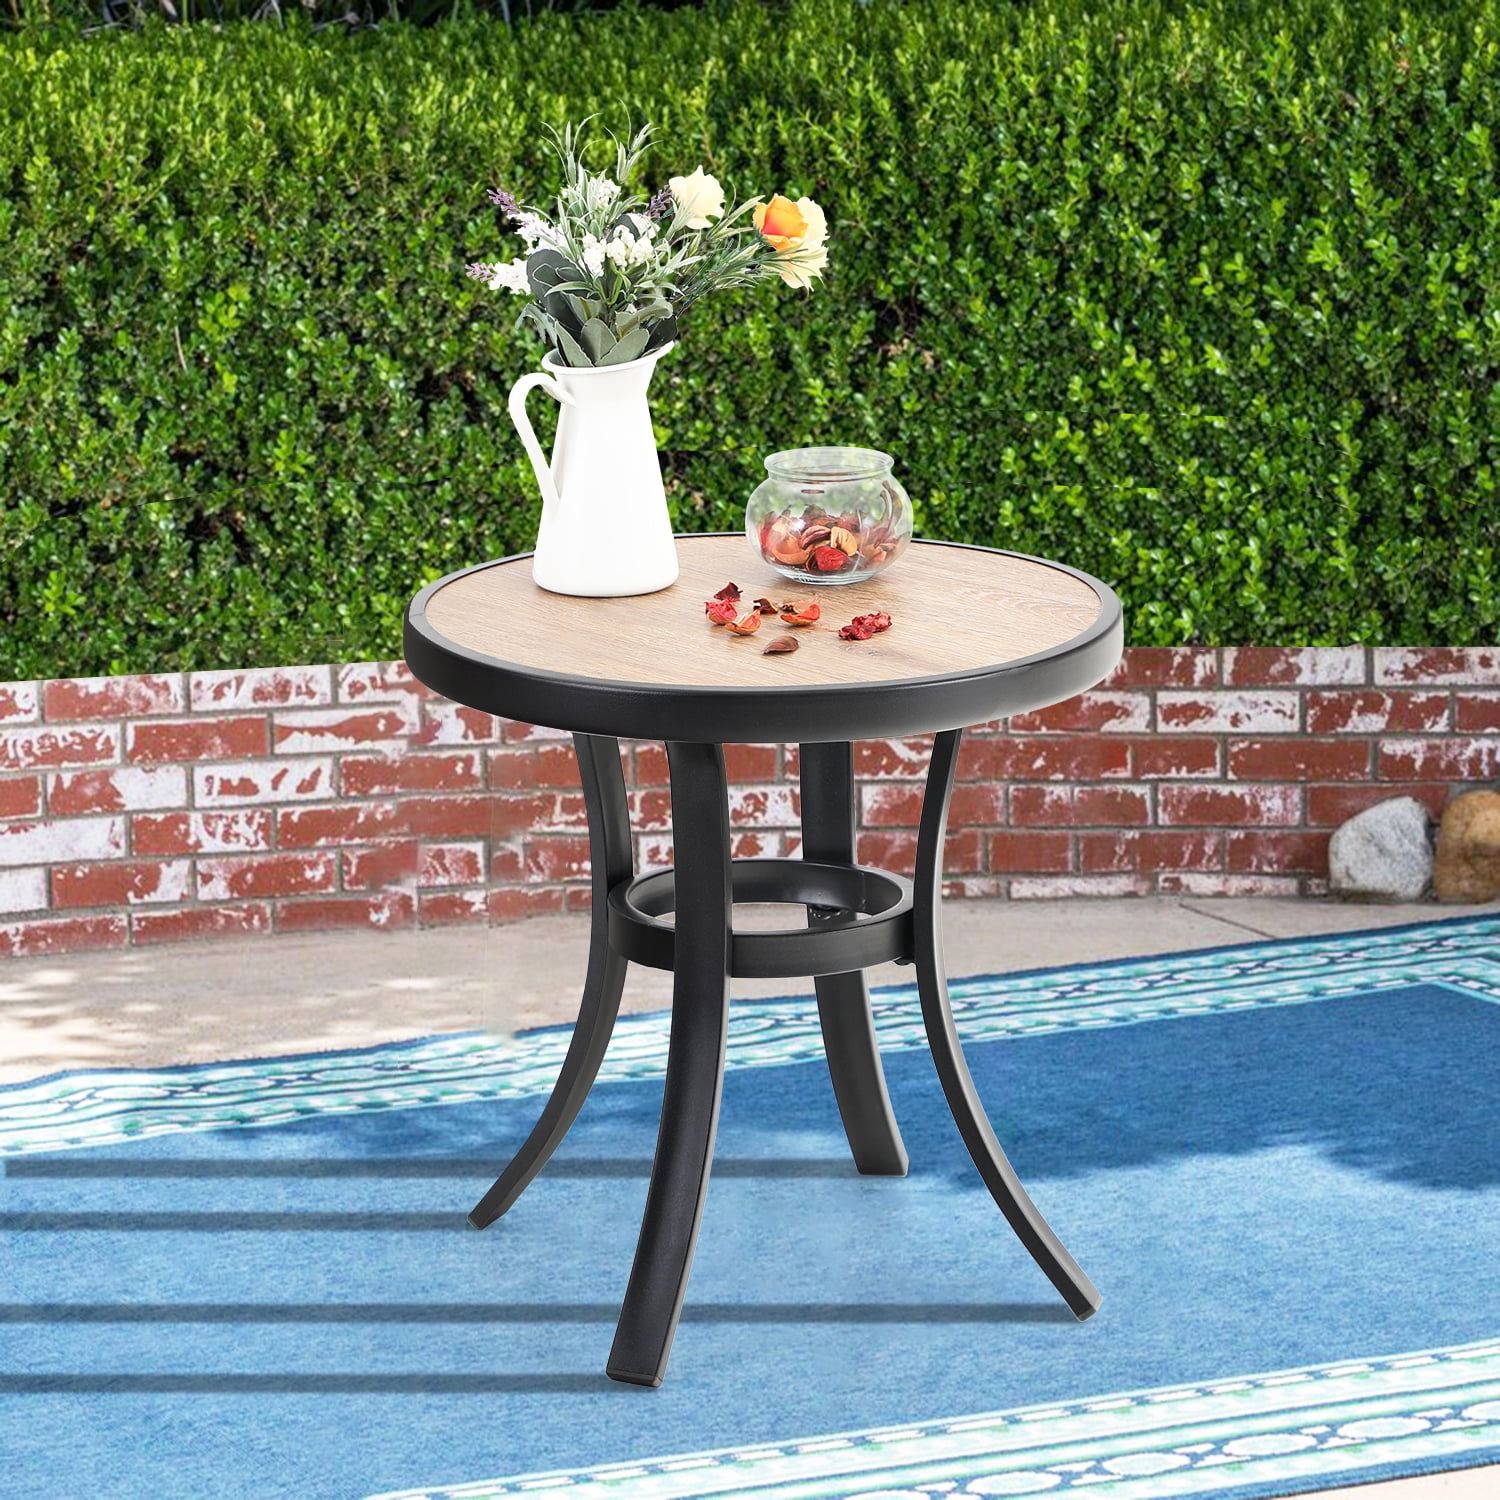 Mf Studio 19 Inches Bistro Side Table, Outdoor Coffee Table Wooden Like With Regard To Round Steel Patio Coffee Tables (Gallery 18 of 20)